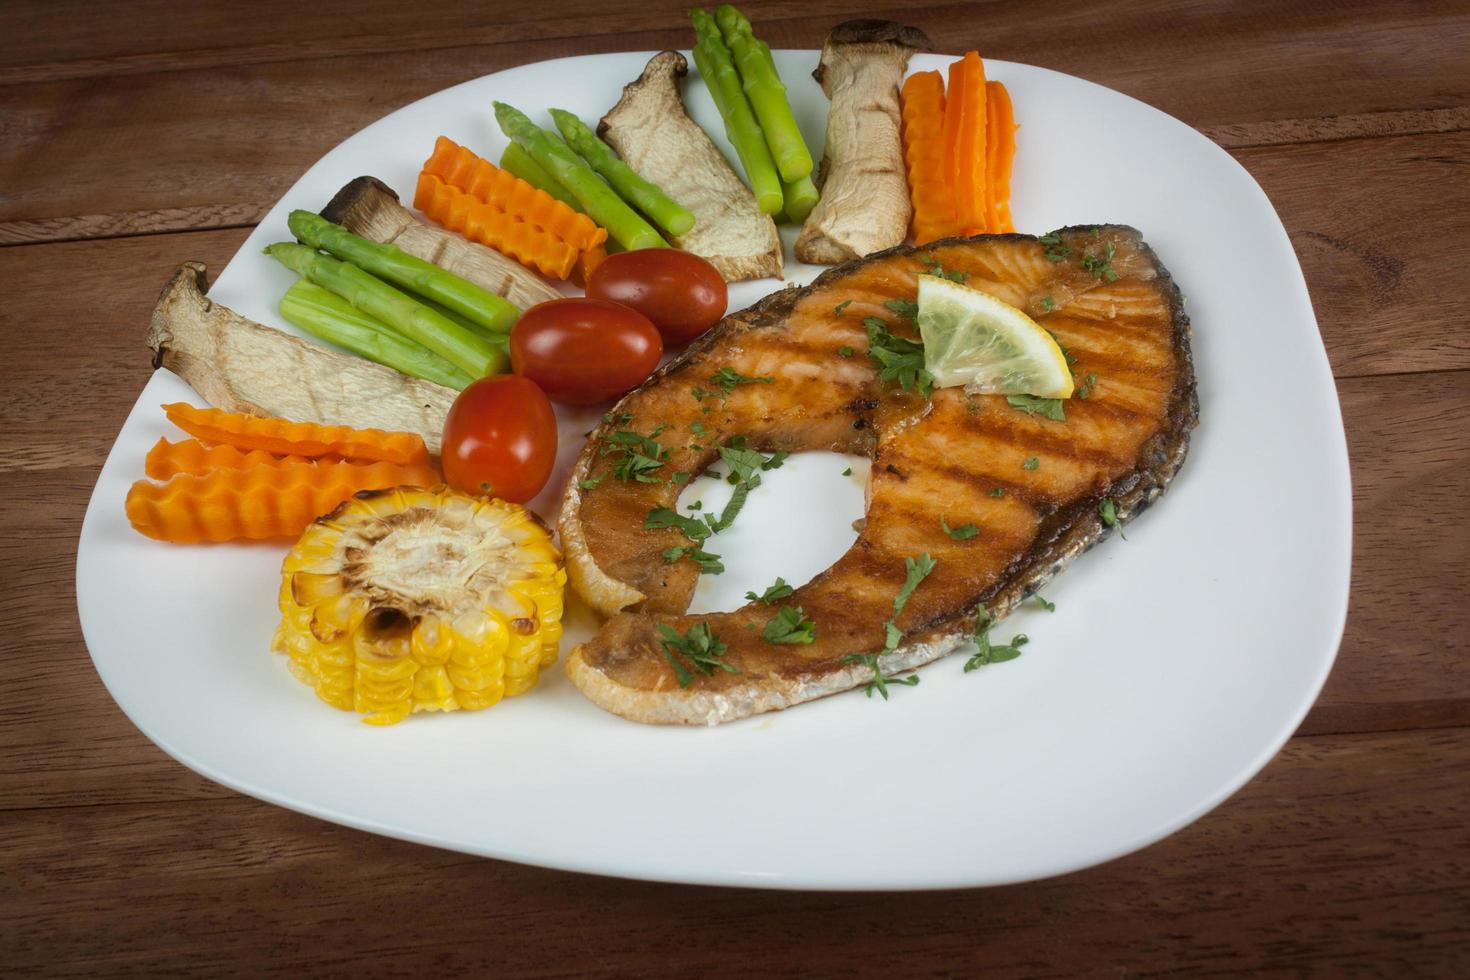 Grilled salmon steak slides until cooked, placed on a white plate with lemon on fish and vegetables, placed around the dish on a wooden floor. photo